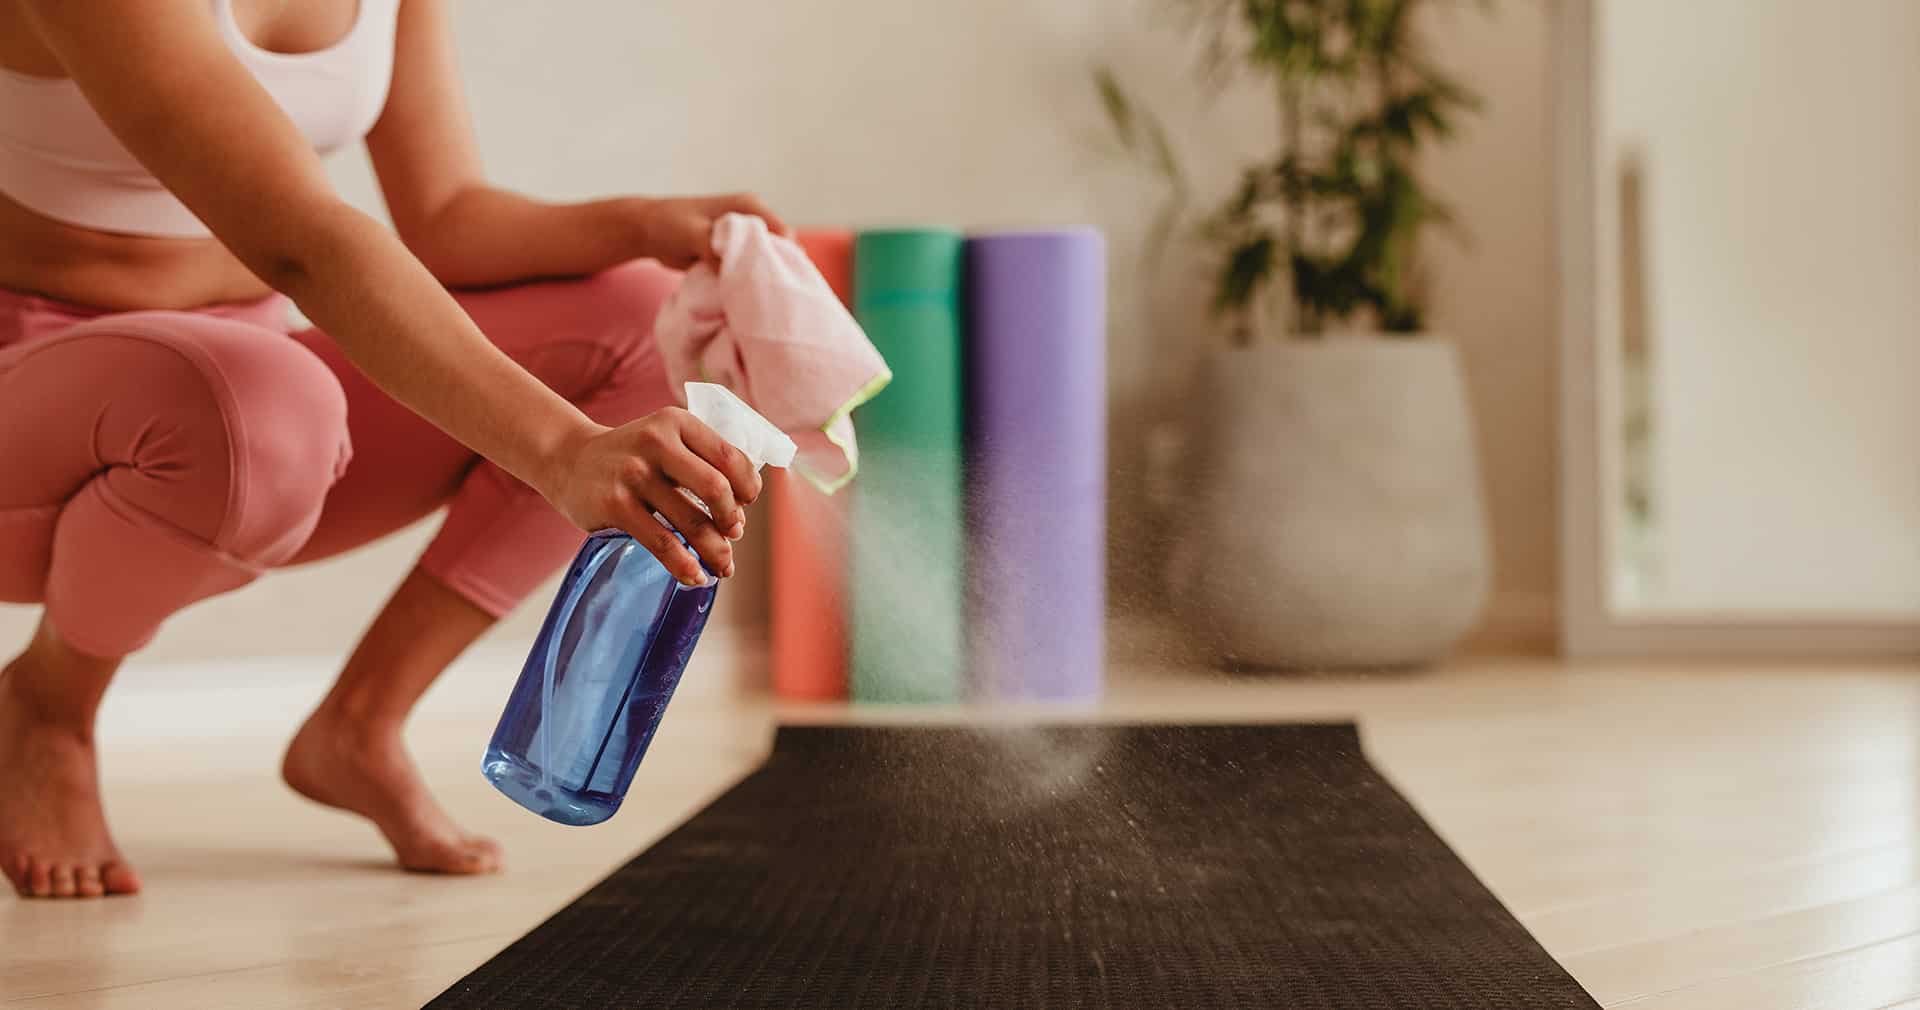 Person cleaning exercise mat with disinfectant spray in gym